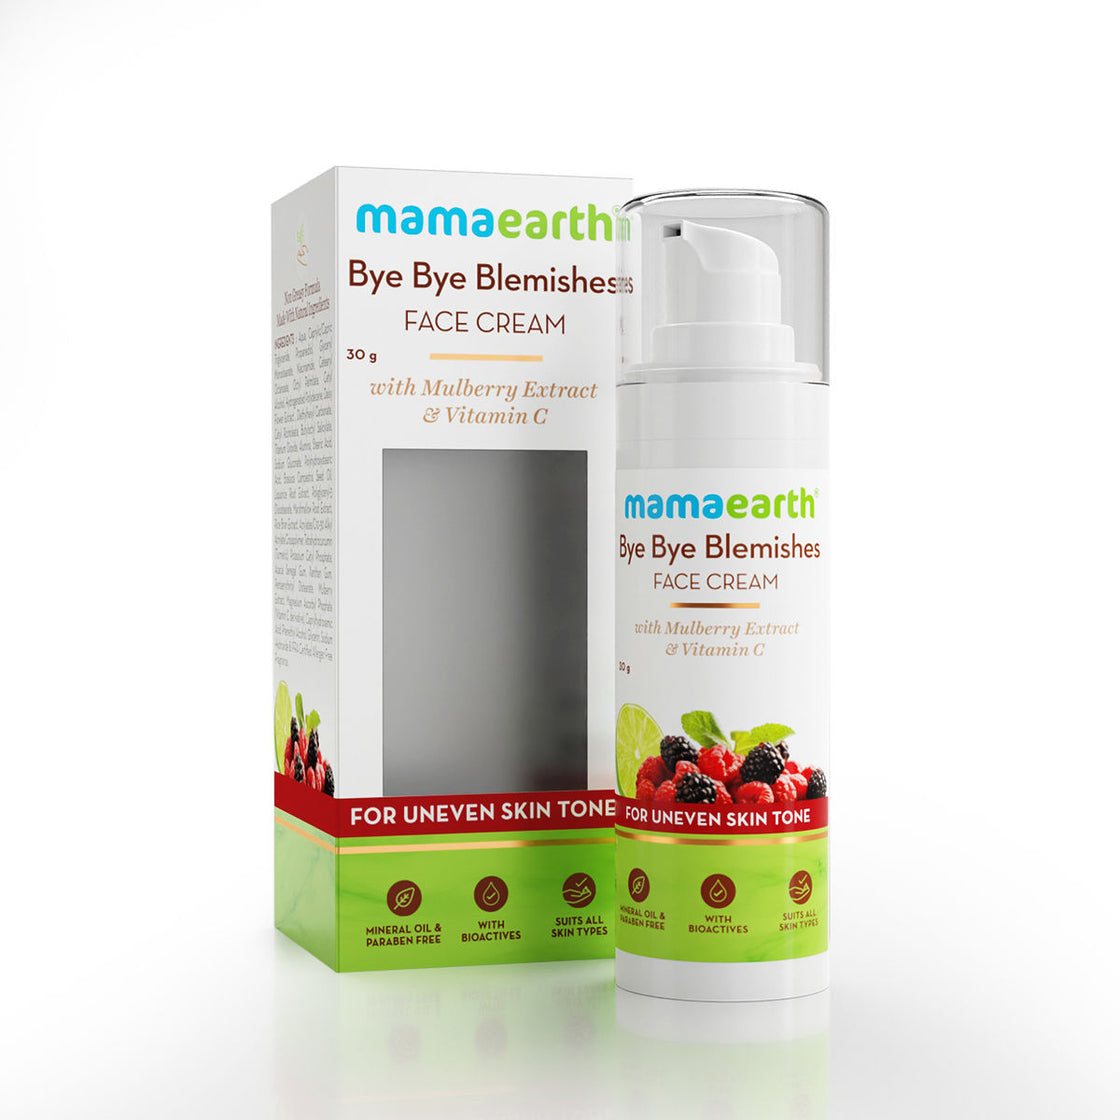 Mamaearth Bye Bye Blemishes Face Cream With Mulberry Extract & Vitamin C-8